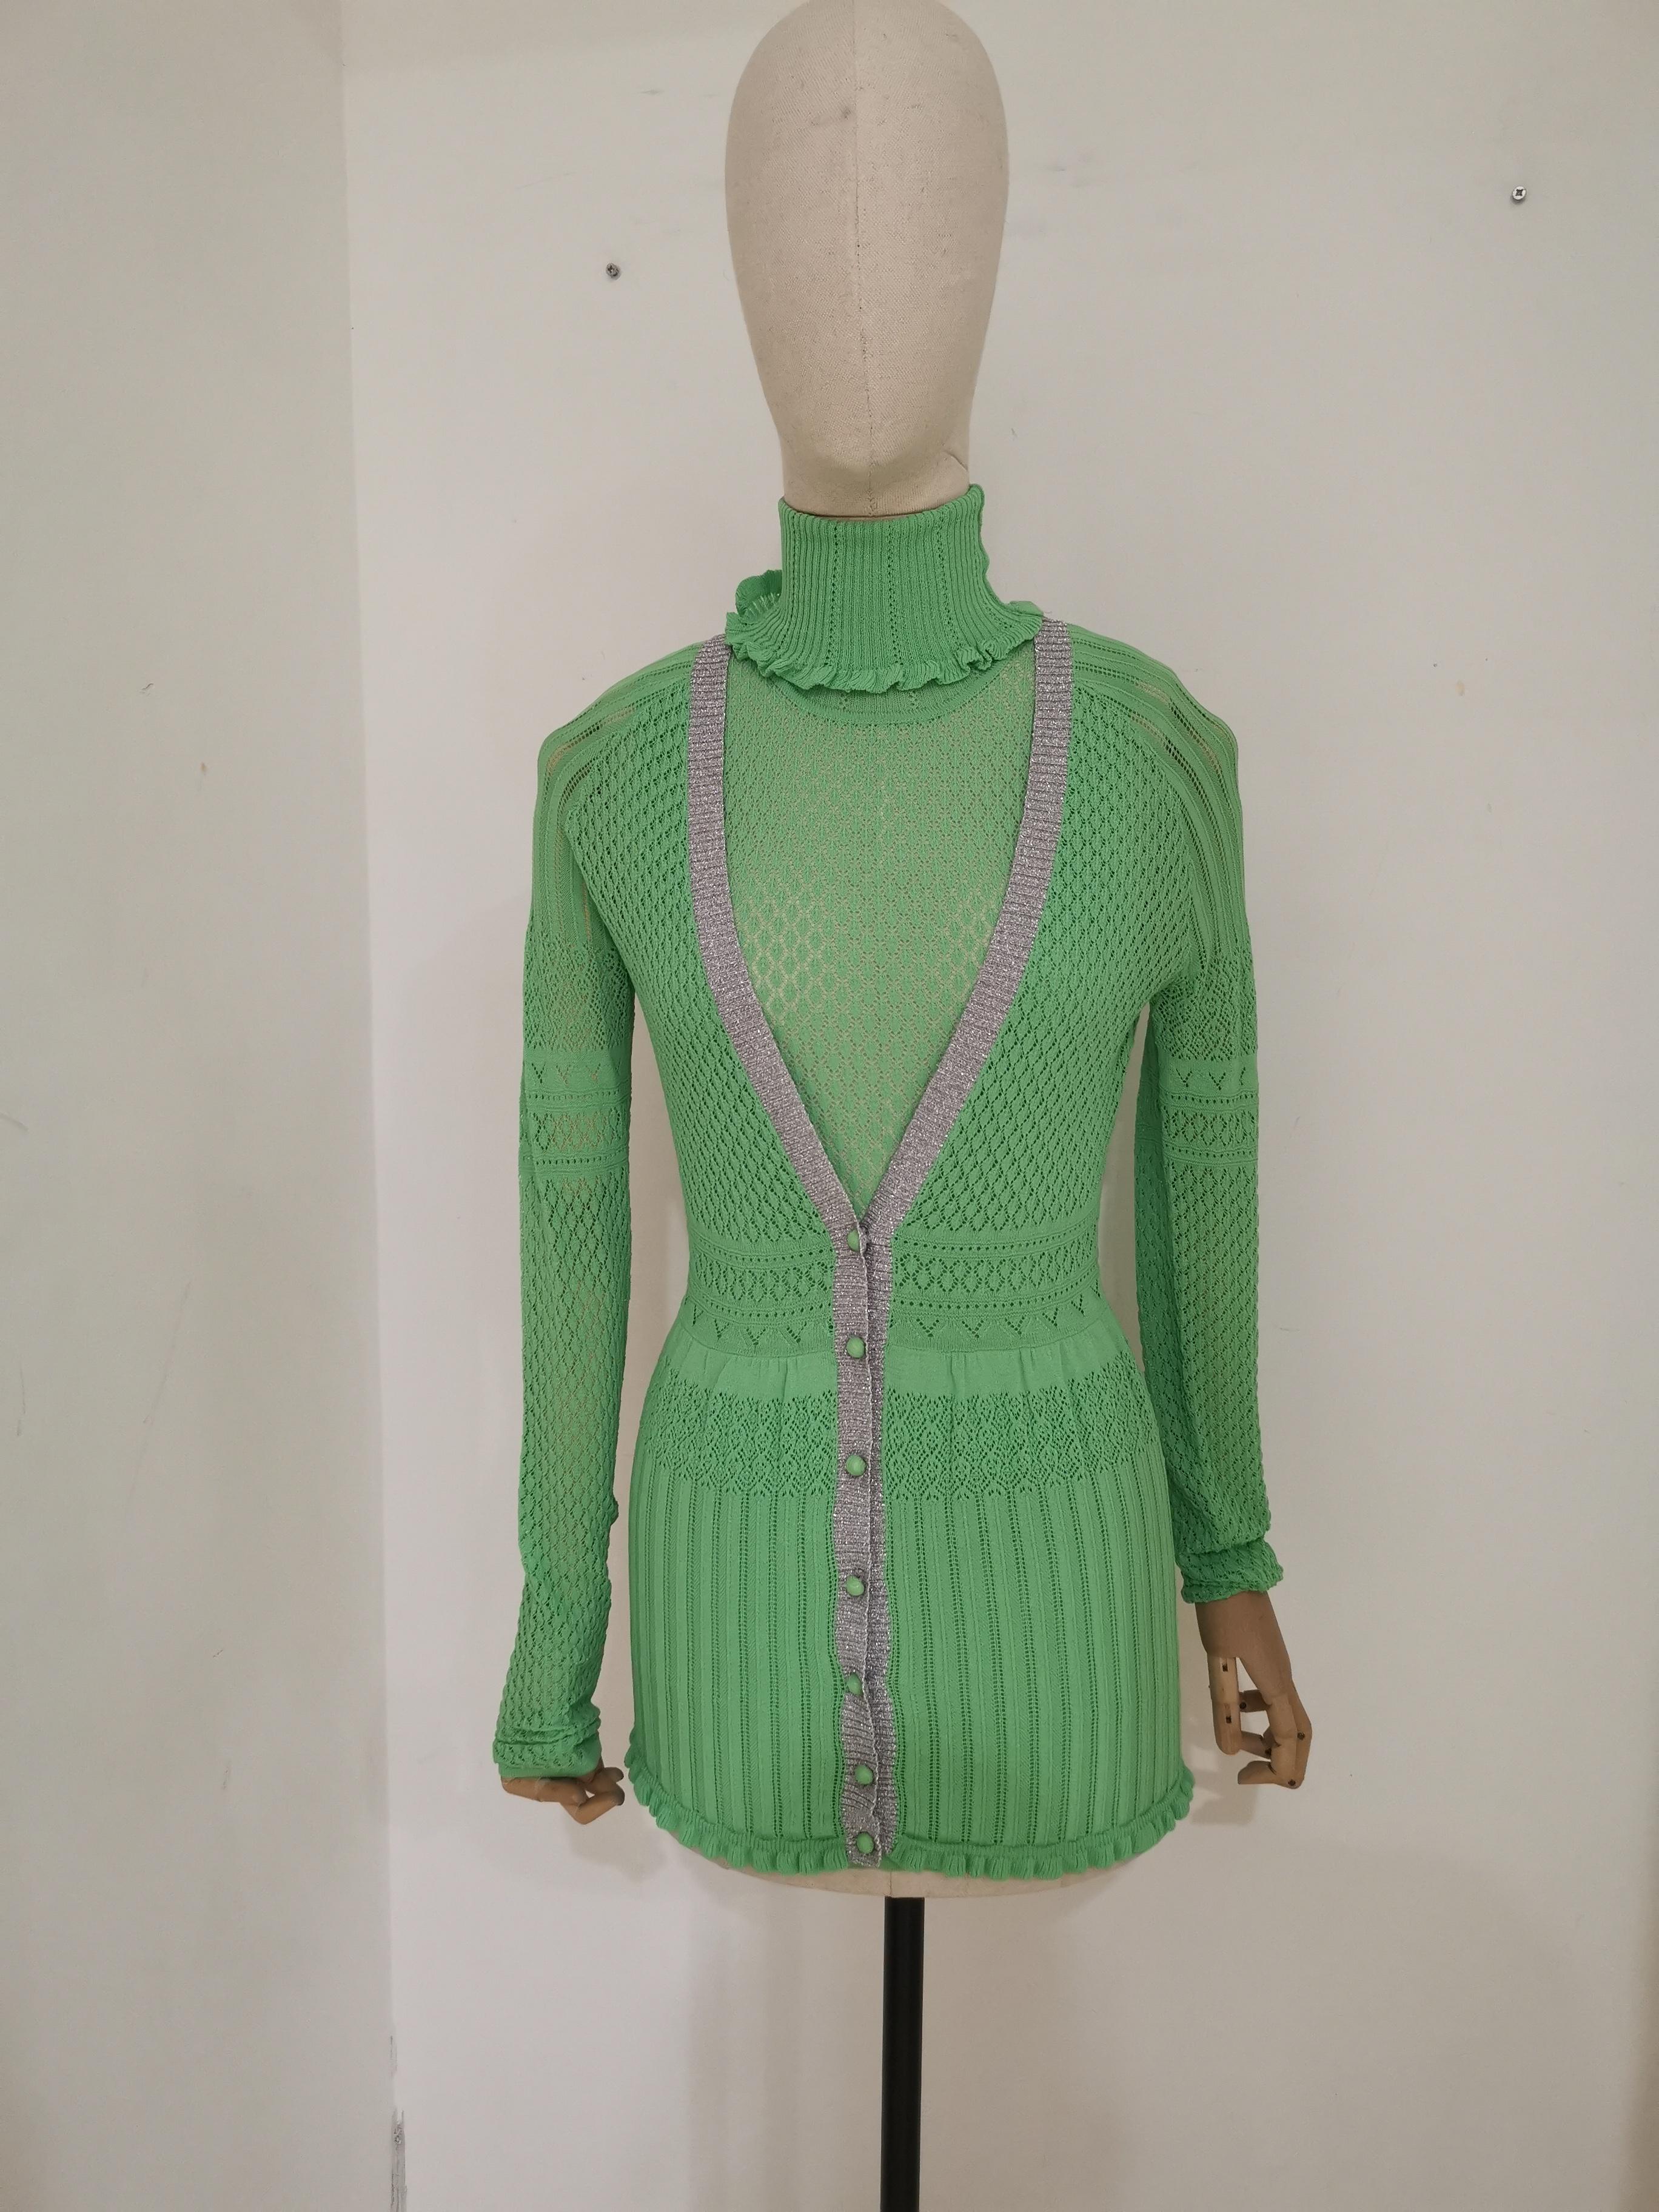 Gianfranco Ferré green twin set
totally made in italy in size S